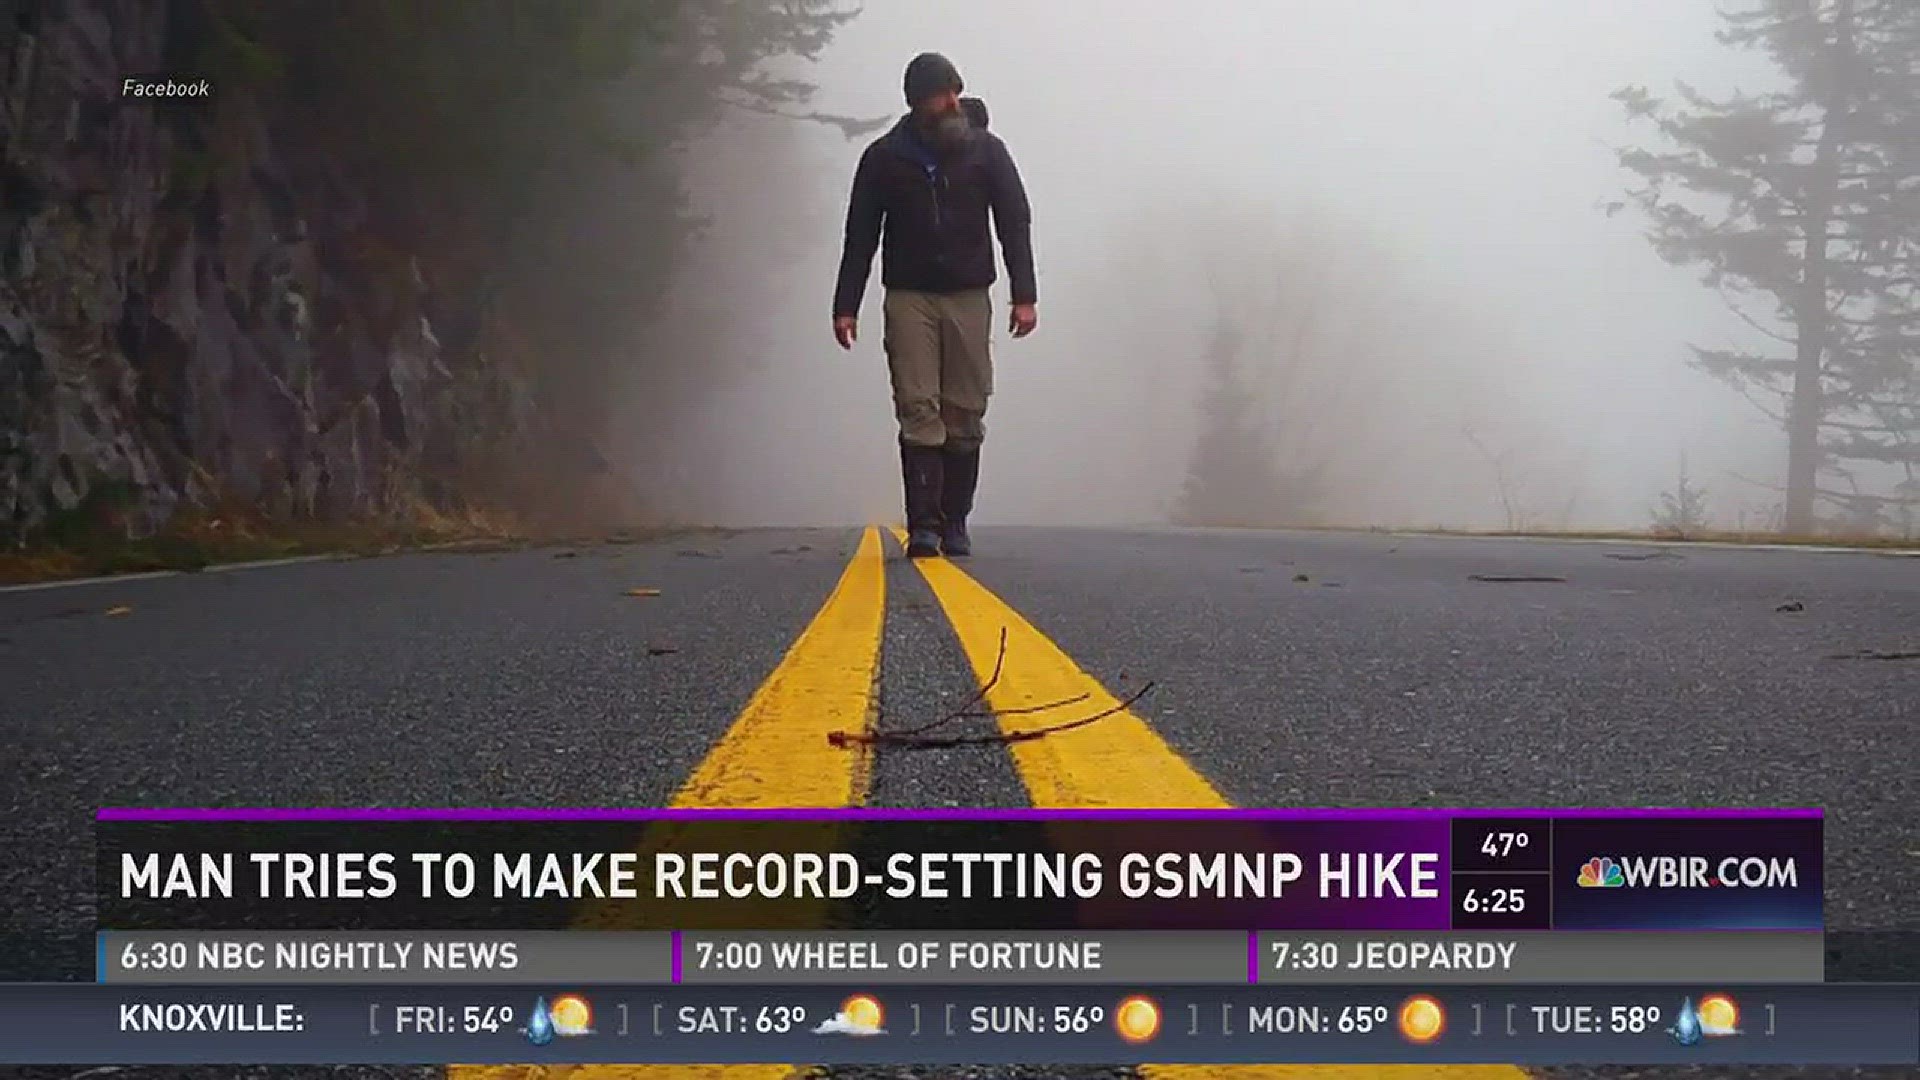 Mar 16, 2017: Harriman's Benny Braden is set to become the fastest person to completely hike every trail in the Great Smoky Mountains.